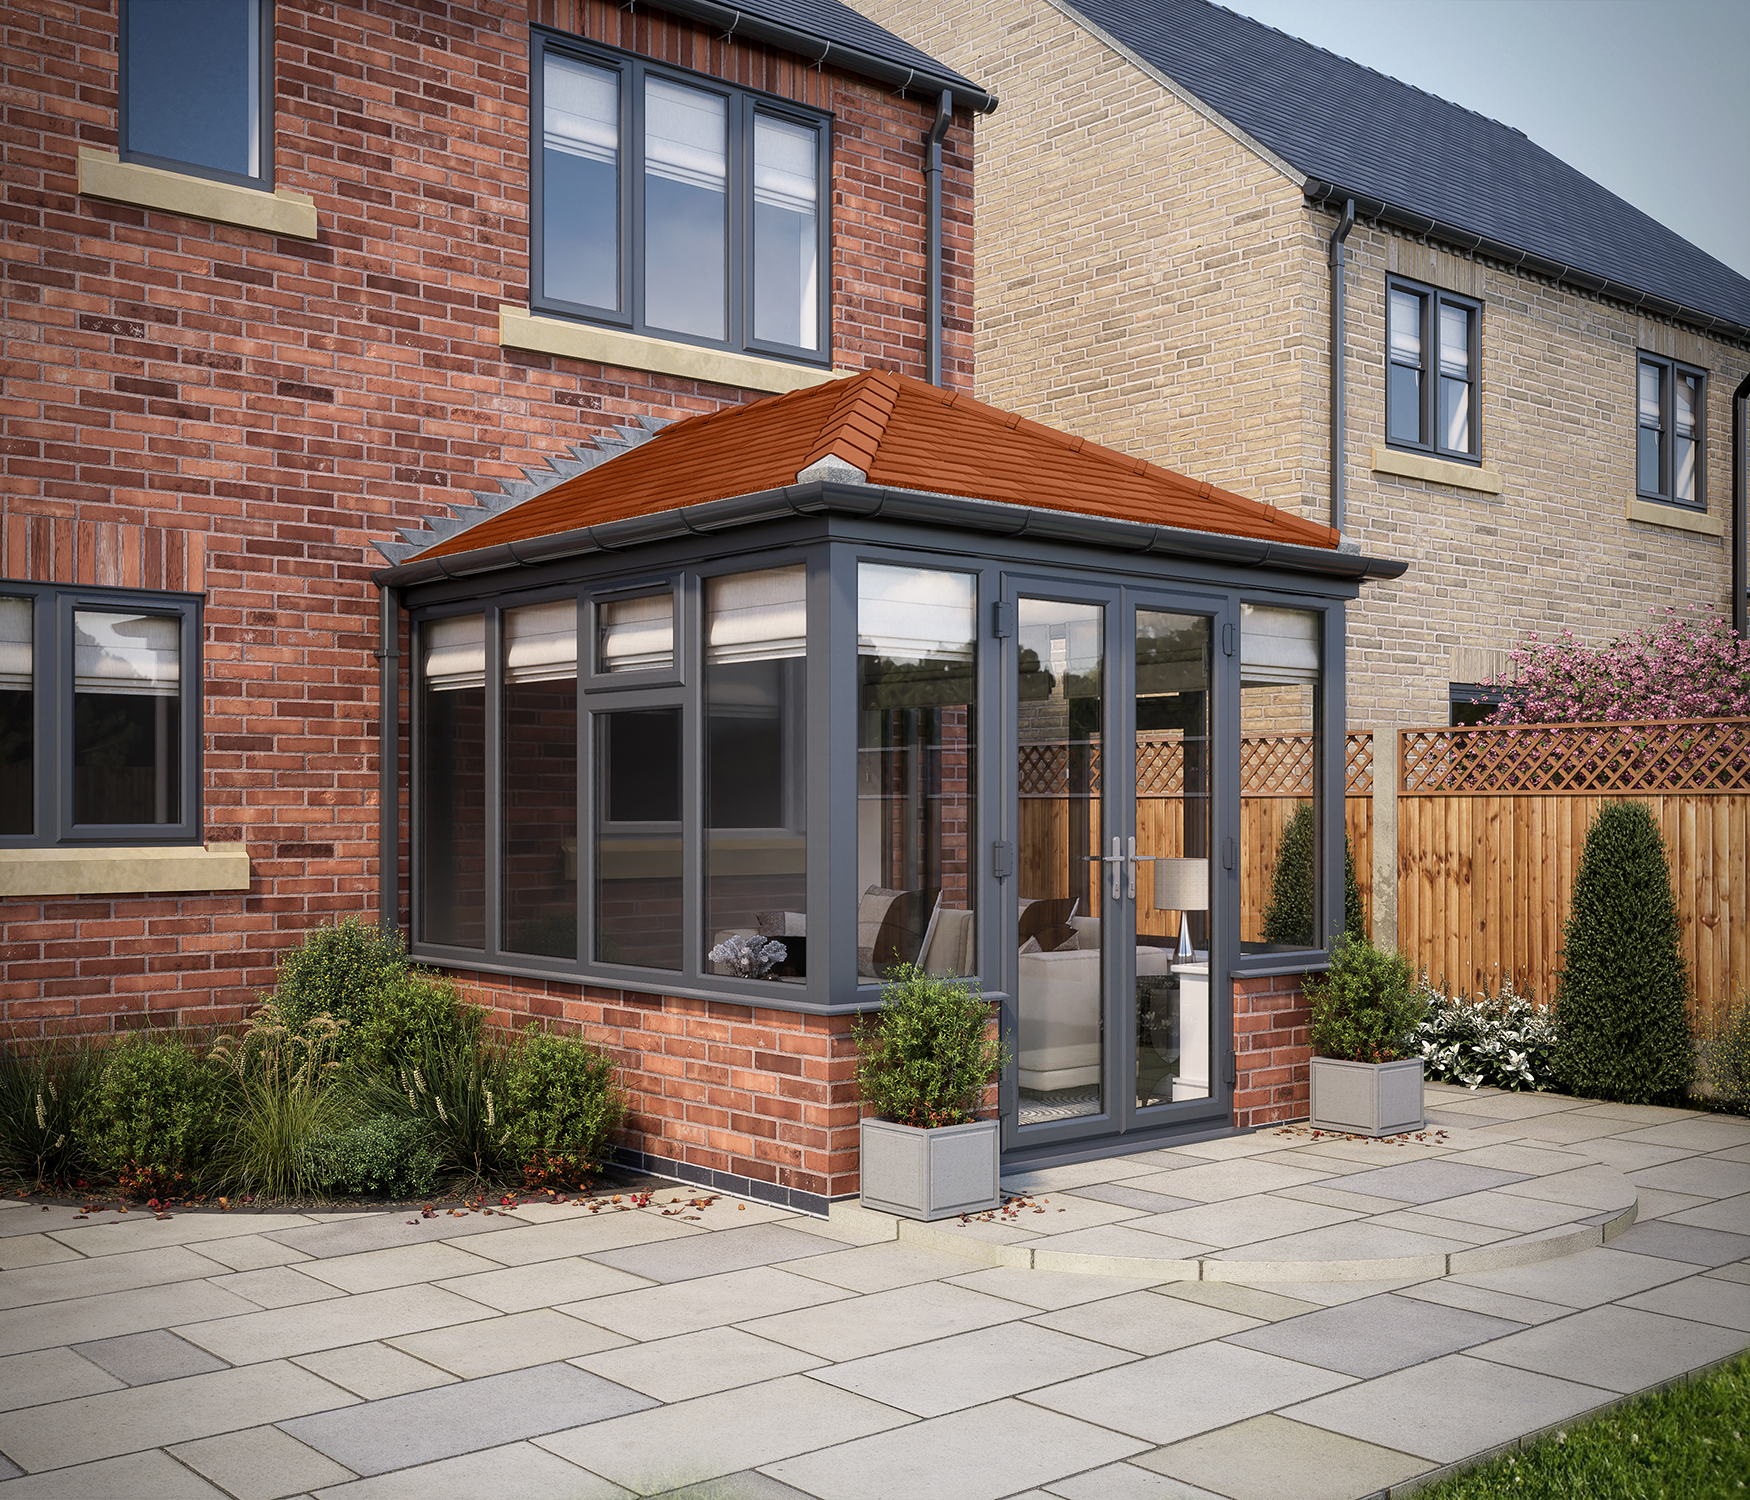 SOLid roof Edwardian Conservatory Grey Frames Dwarf Wall with Rustic Terracotta Tiles